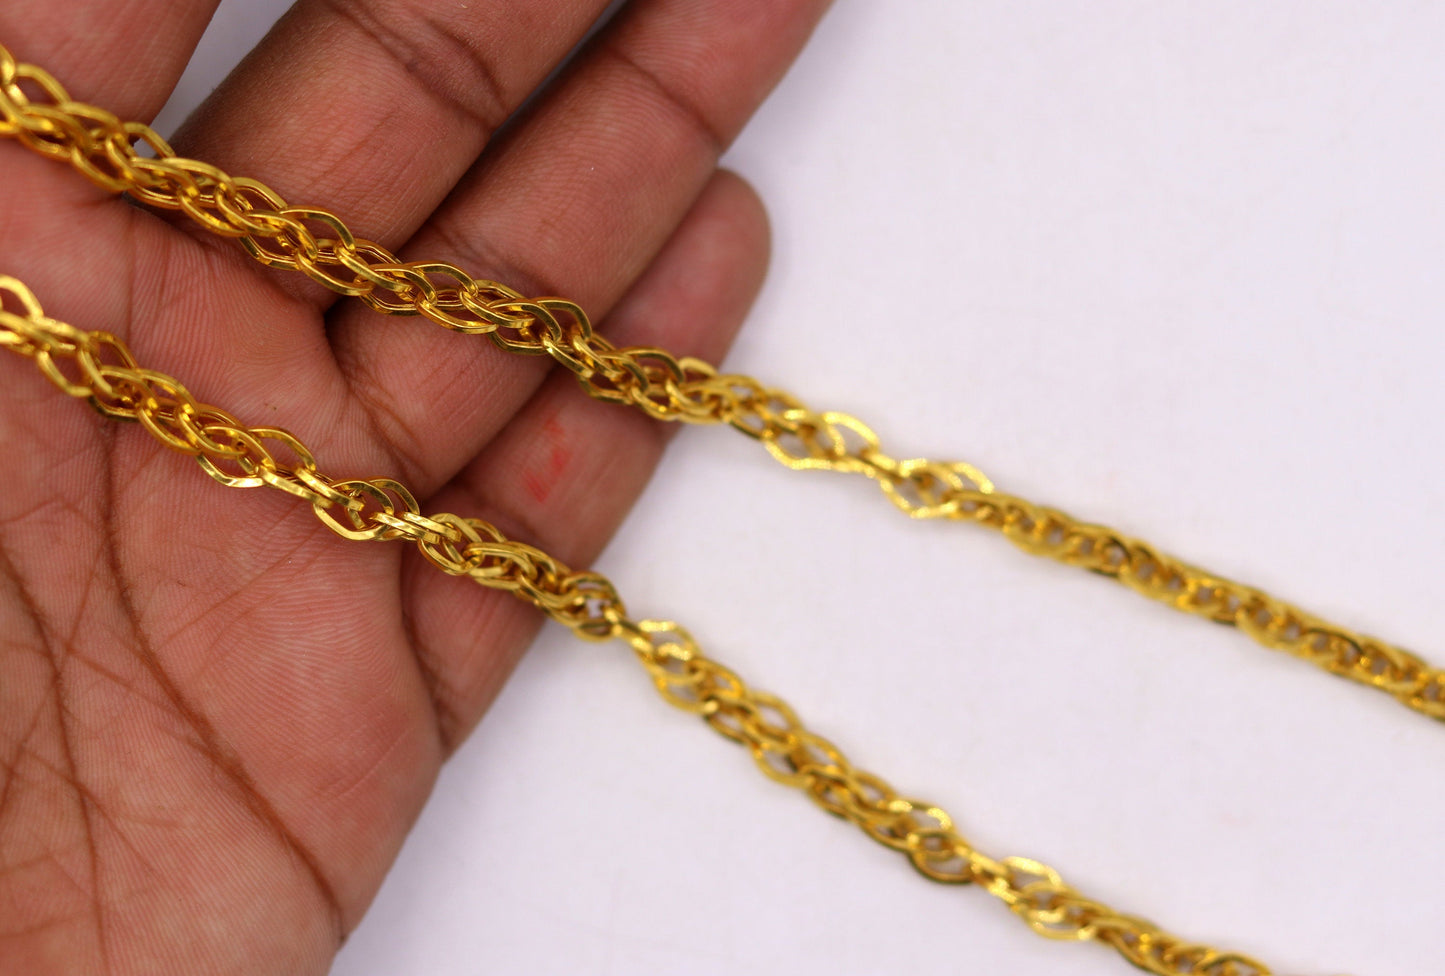 22k 22carat yellow gold handmade excellent 20 inches multi link chain unisex gifting chain necklace - TRIBAL ORNAMENTS